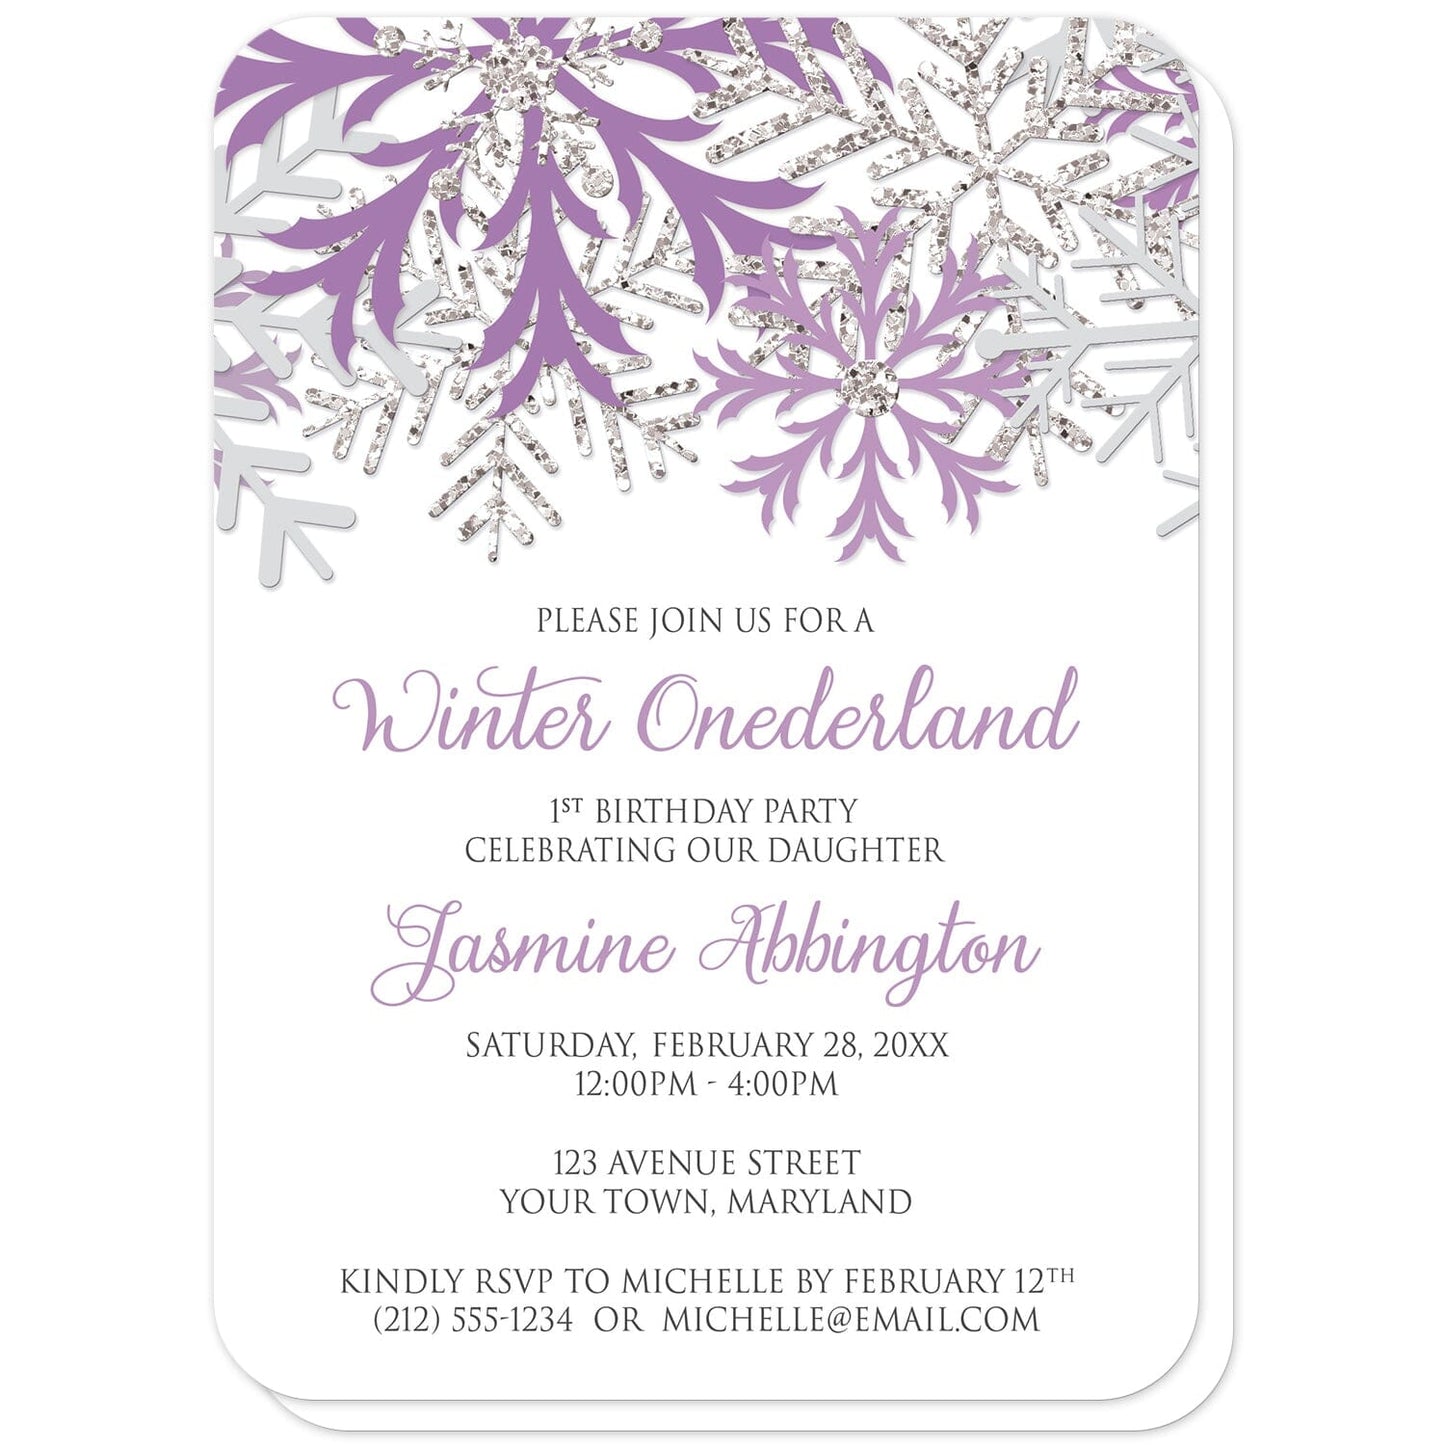 Purple Silver Snowflake 1st Birthday Winter Onederland Invitations (with rounded corners) at Artistically Invited. Pretty purple silver snowflake 1st birthday Winter Onederland invitations designed with purple, light purple, silver-colored glitter-illustrated, and light gray snowflakes along the top of the invitations. Your personalized 1st birthday party details are custom printed in purple and gray on white below the snowflakes.